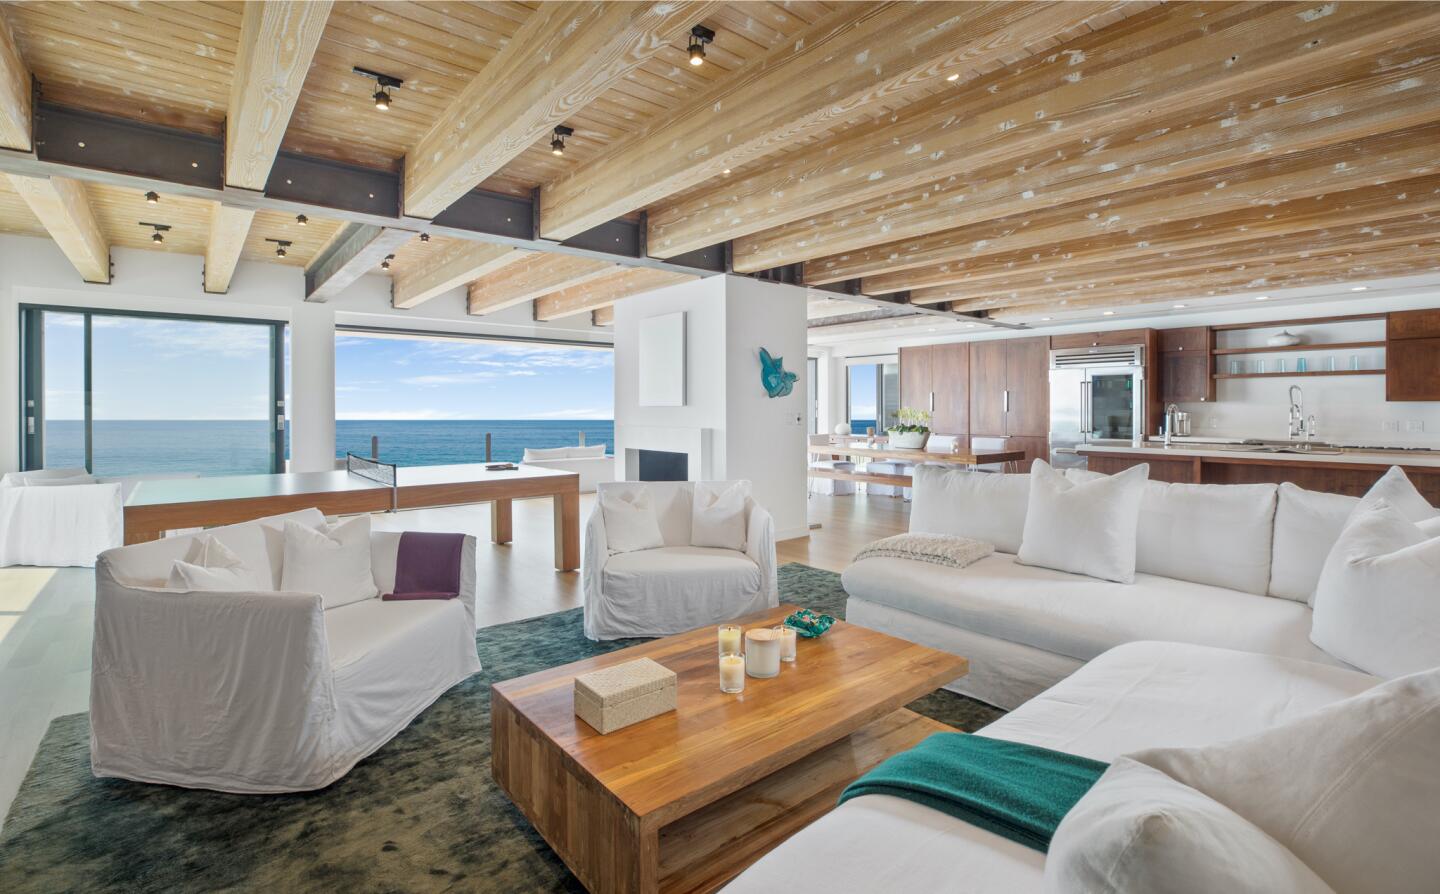 The architectural beach house expands to two levels of wood decks overlooking the ocean.